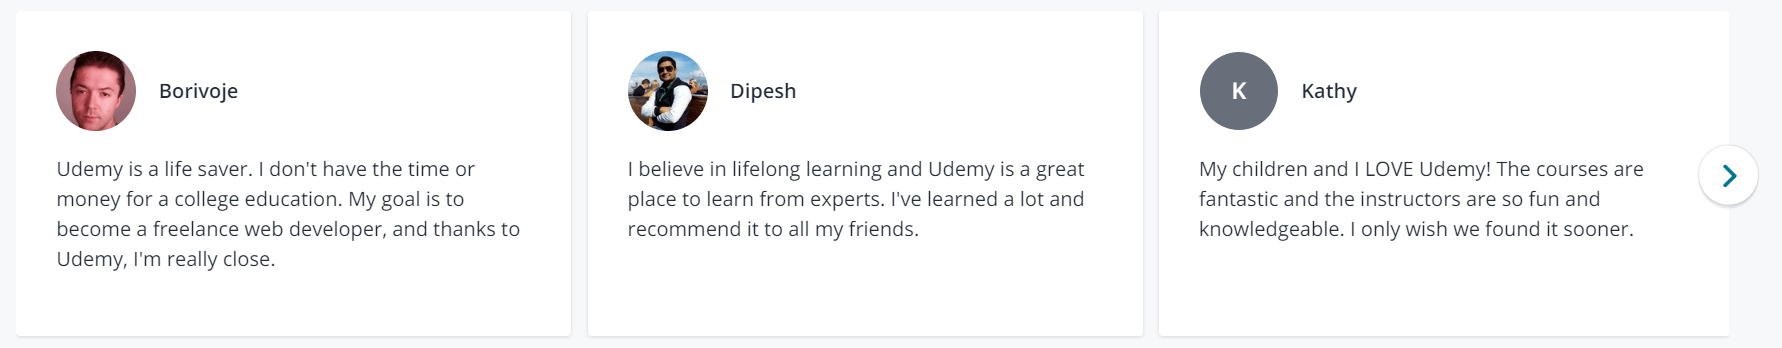 Does Udemy Work Positive Reviews